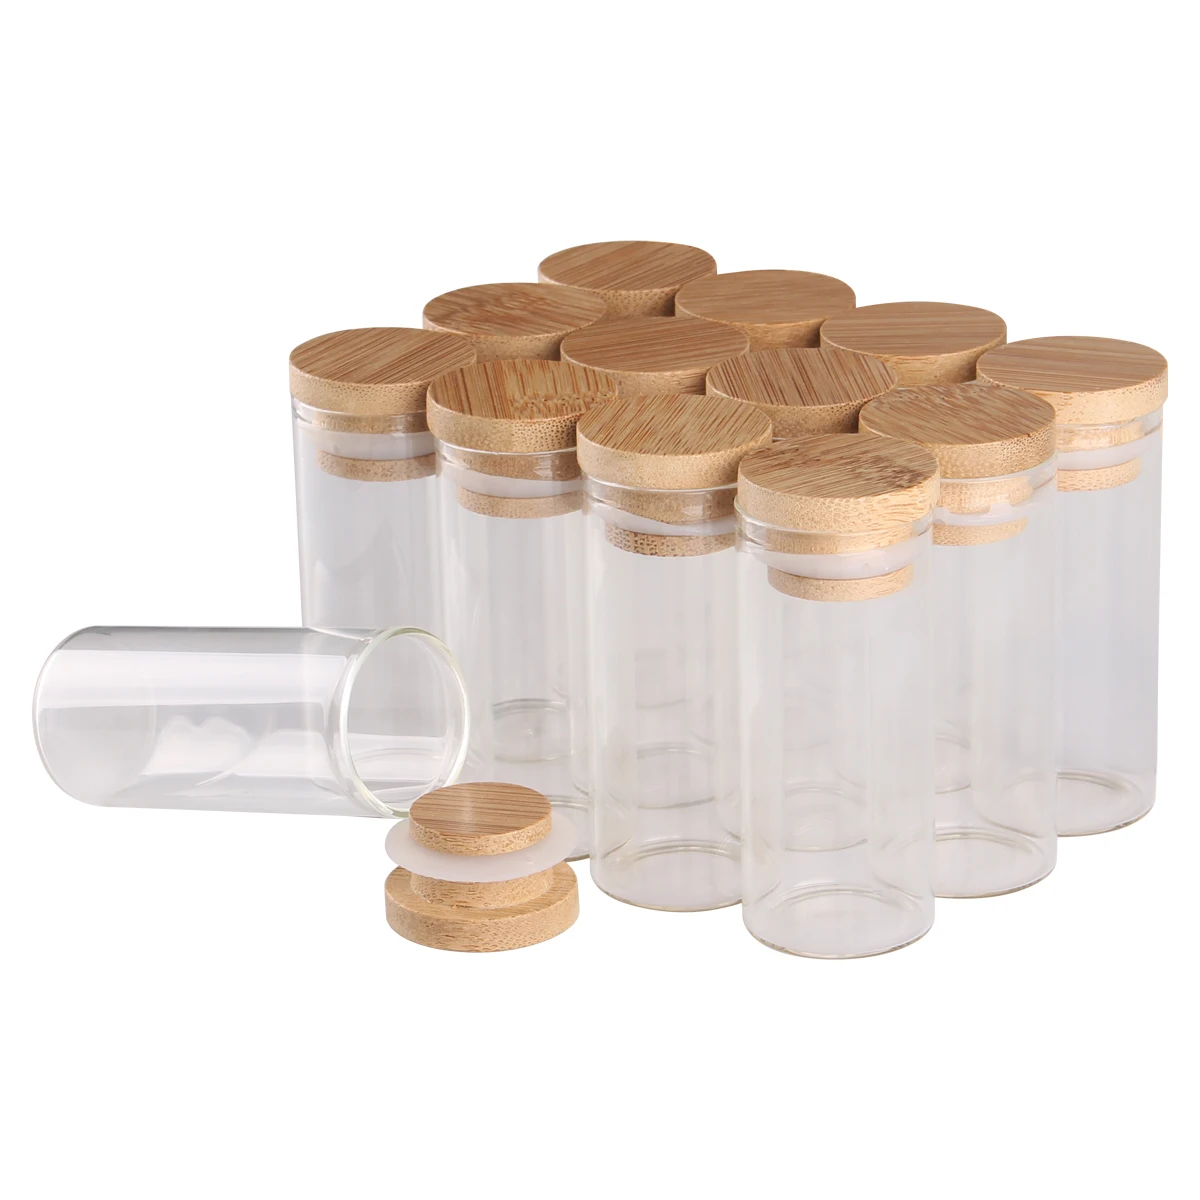 12pcs/lot 10ml 15ml 20ml 25ml 30ml 40ml 45ml 50ml 60ml Glass Empty Bottles With Bamboo Caps Spice Jars Glass Vessels DIY Crafts